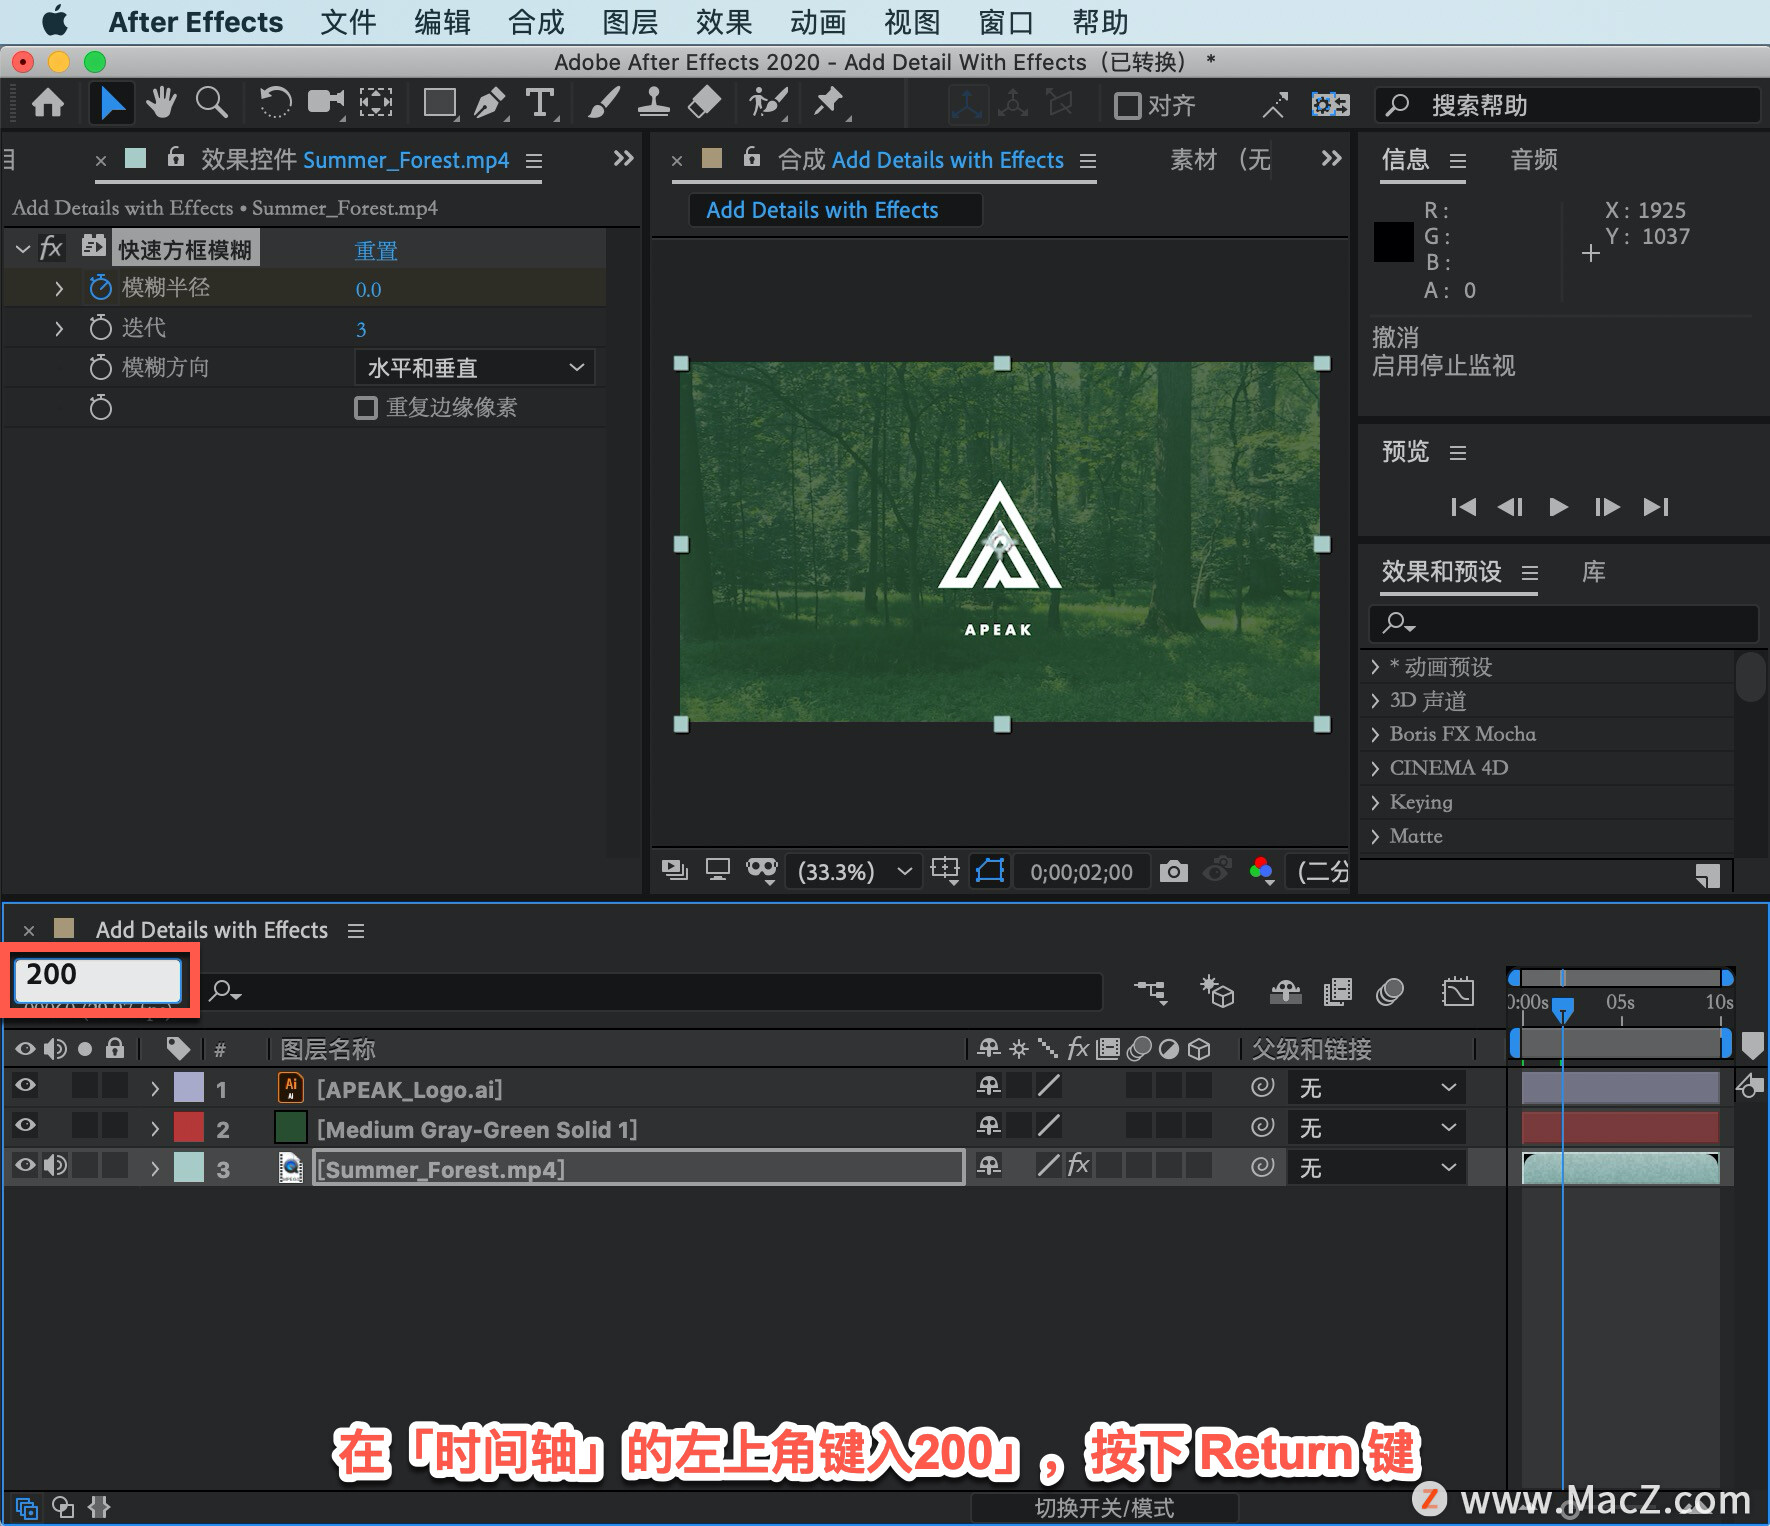 After Effects 教程「11」，如何在 After Effects 中应用效果？